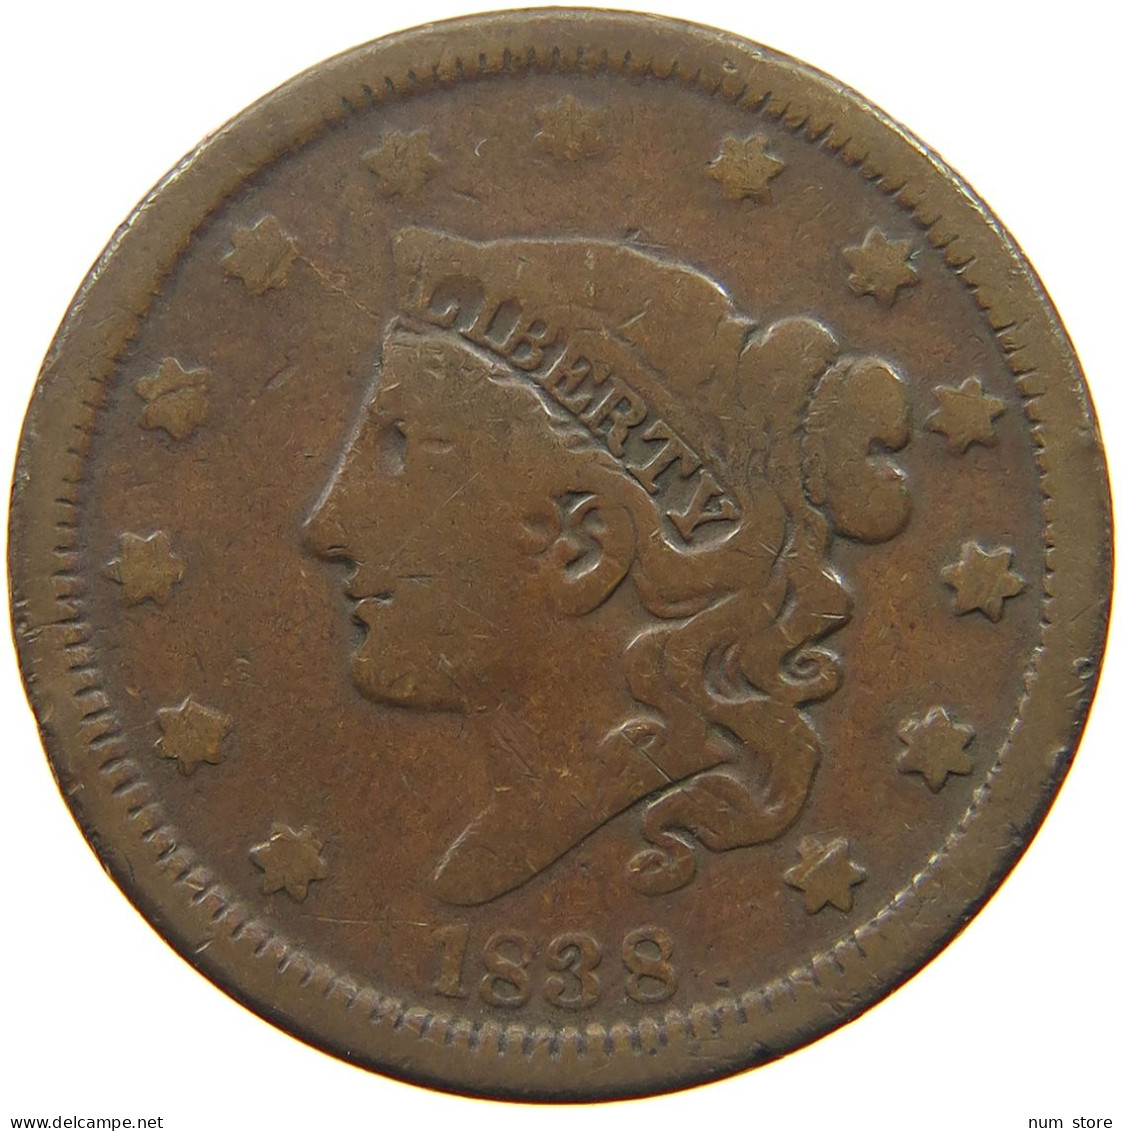 UNITED STATES OF AMERICA LARGE CENT 1838 CORONET HEAD #t141 0277 - 1816-1839: Coronet Head (Tête Couronnée)